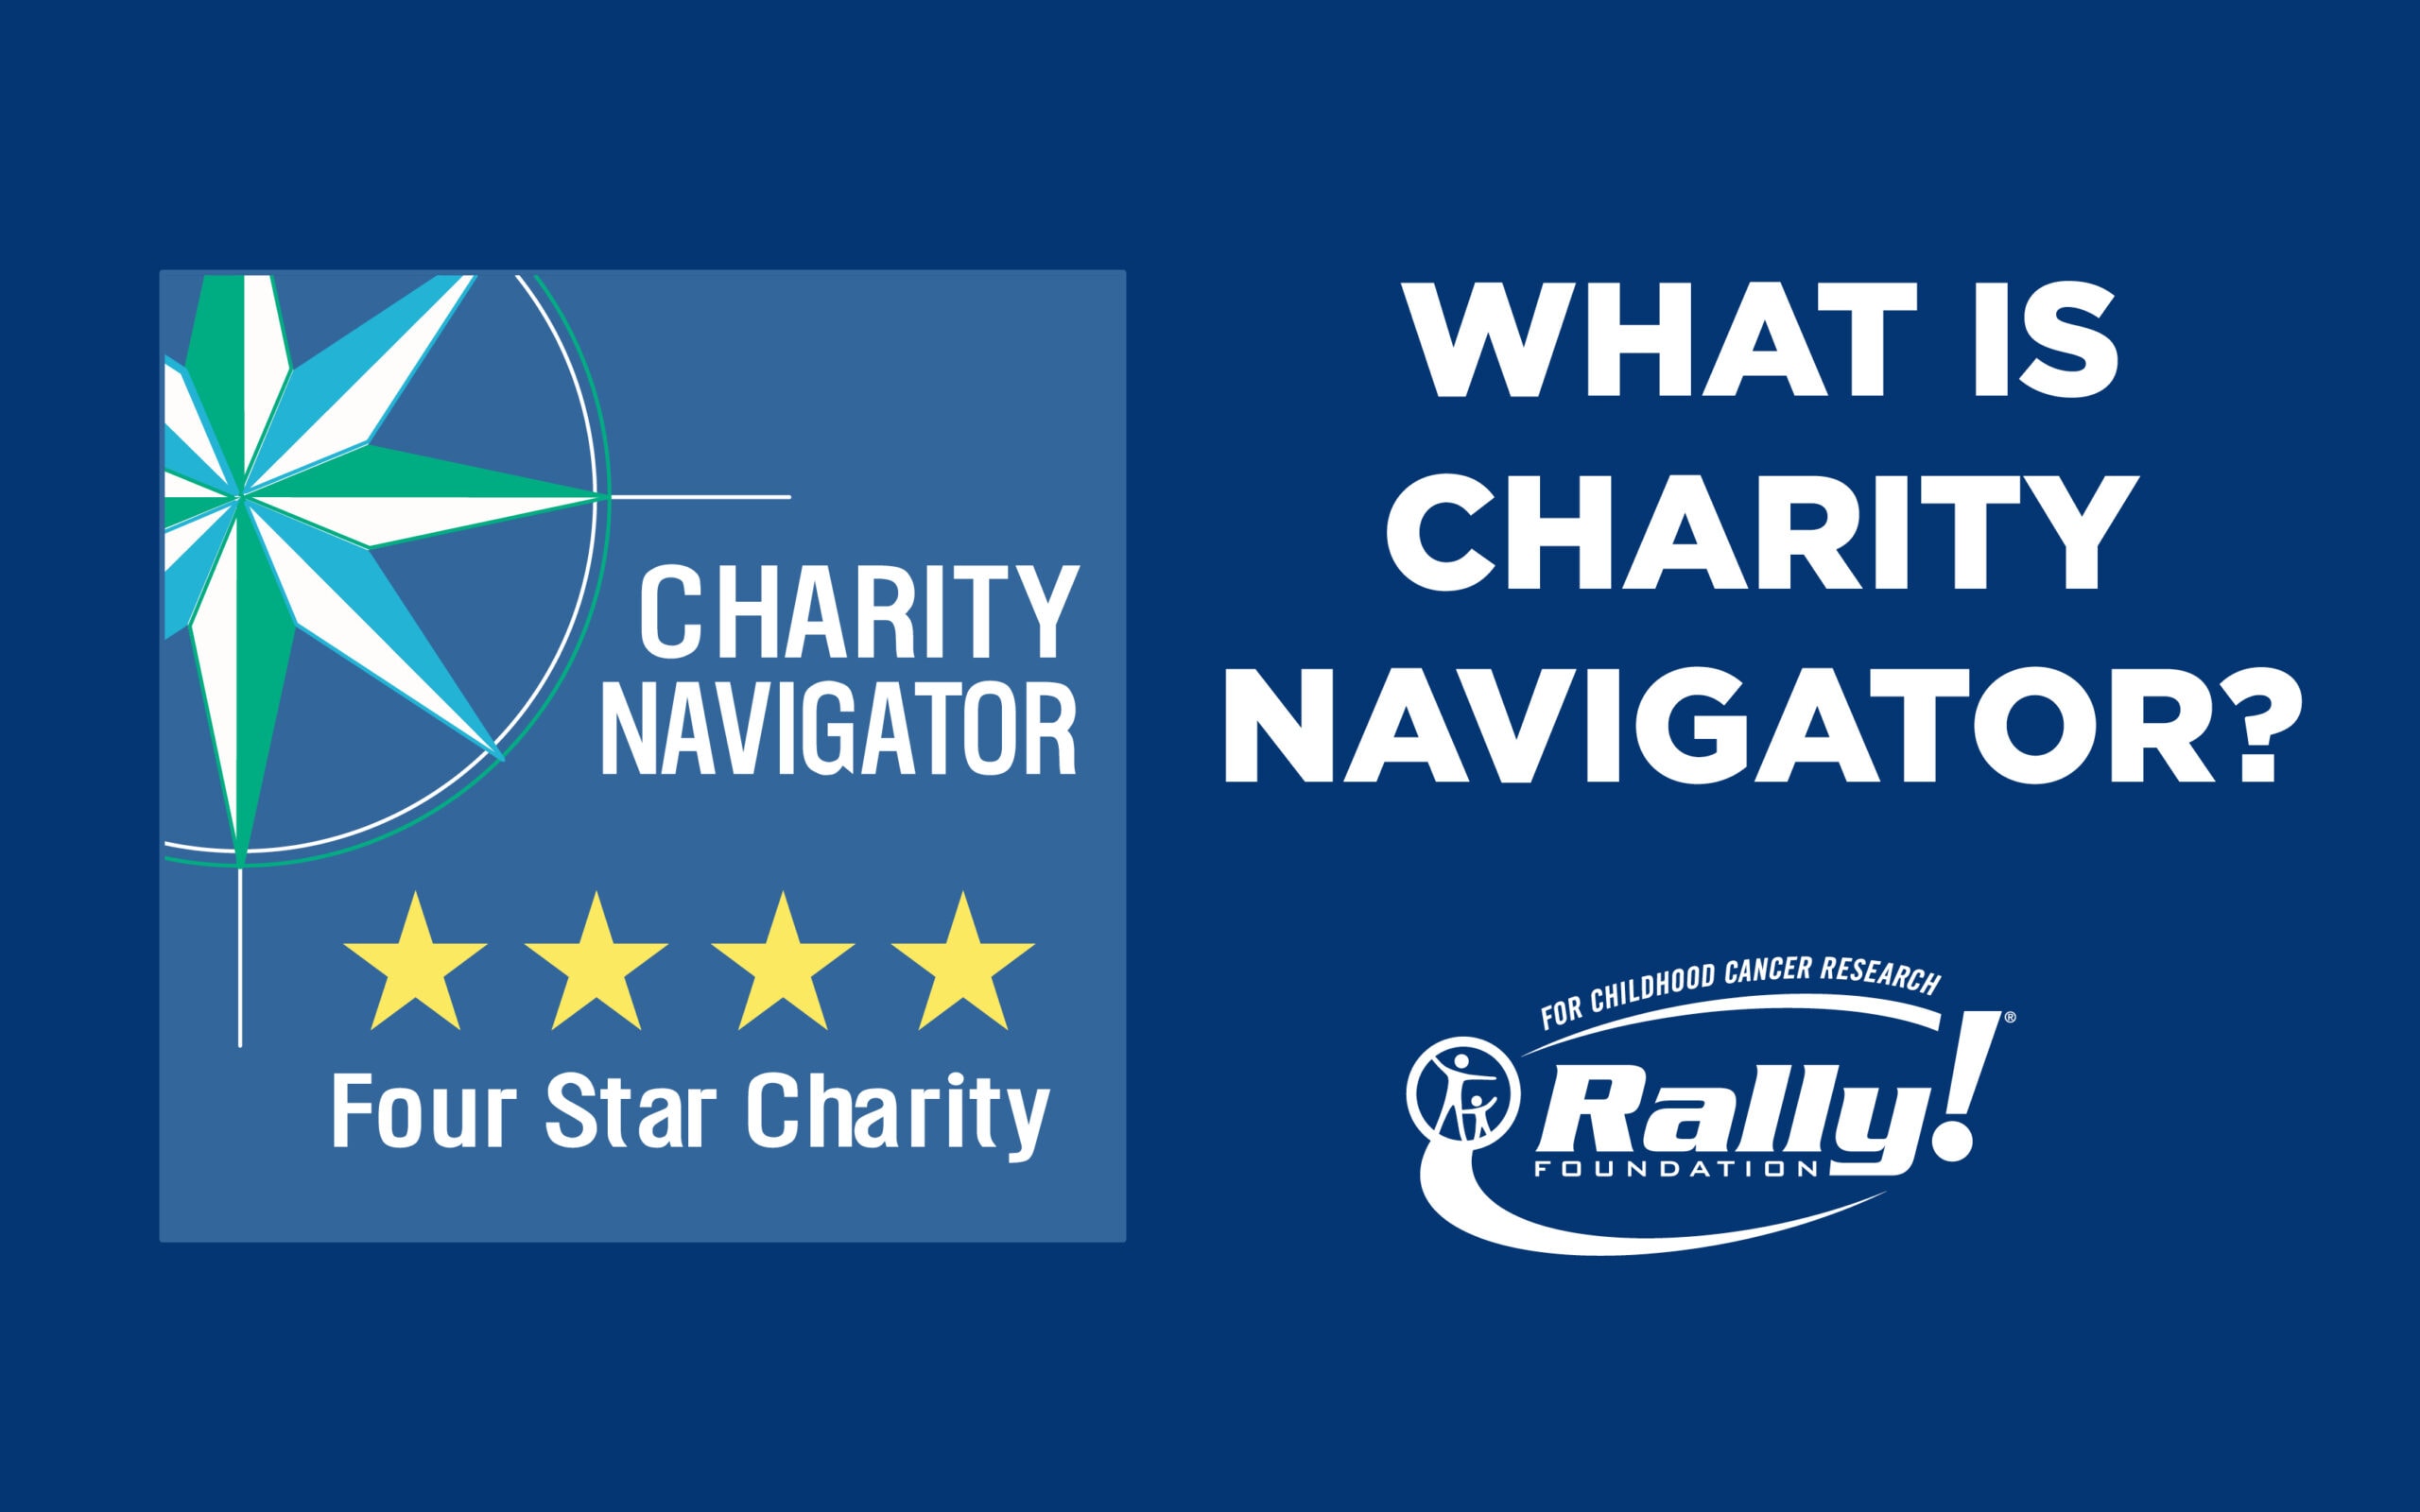 What is Charity Navigator?